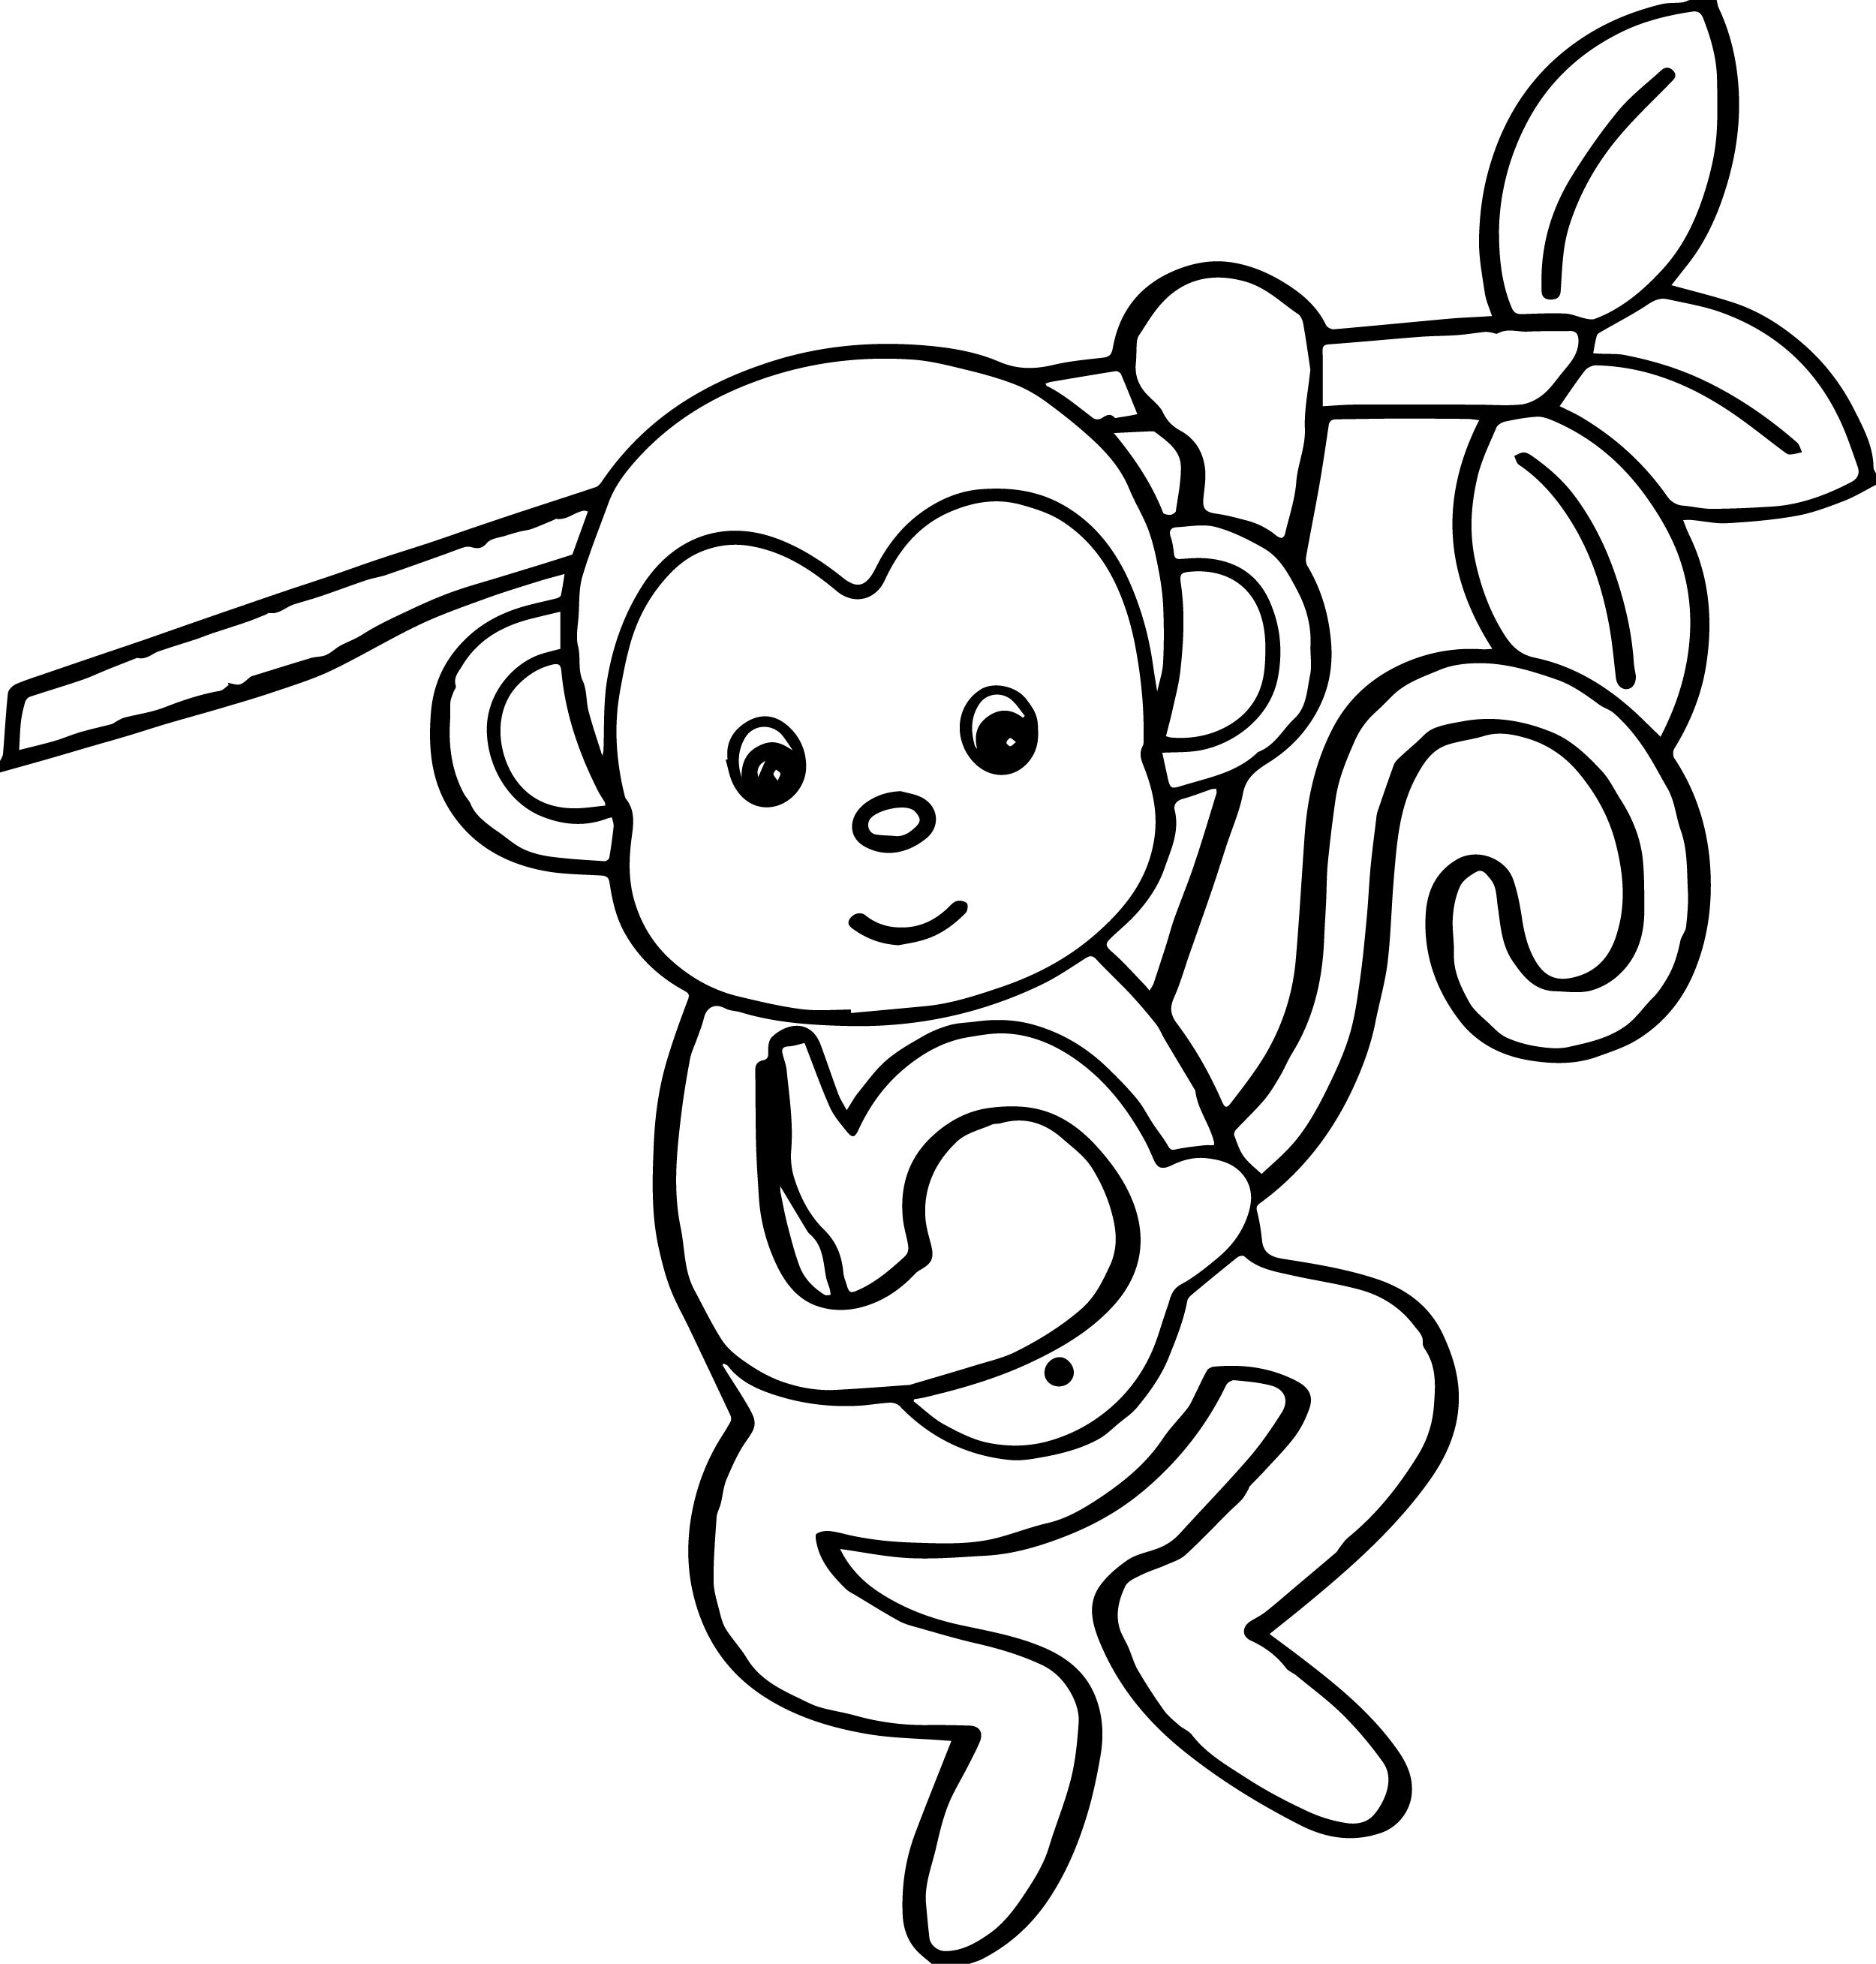 Spider Monkey coloring #14, Download drawings